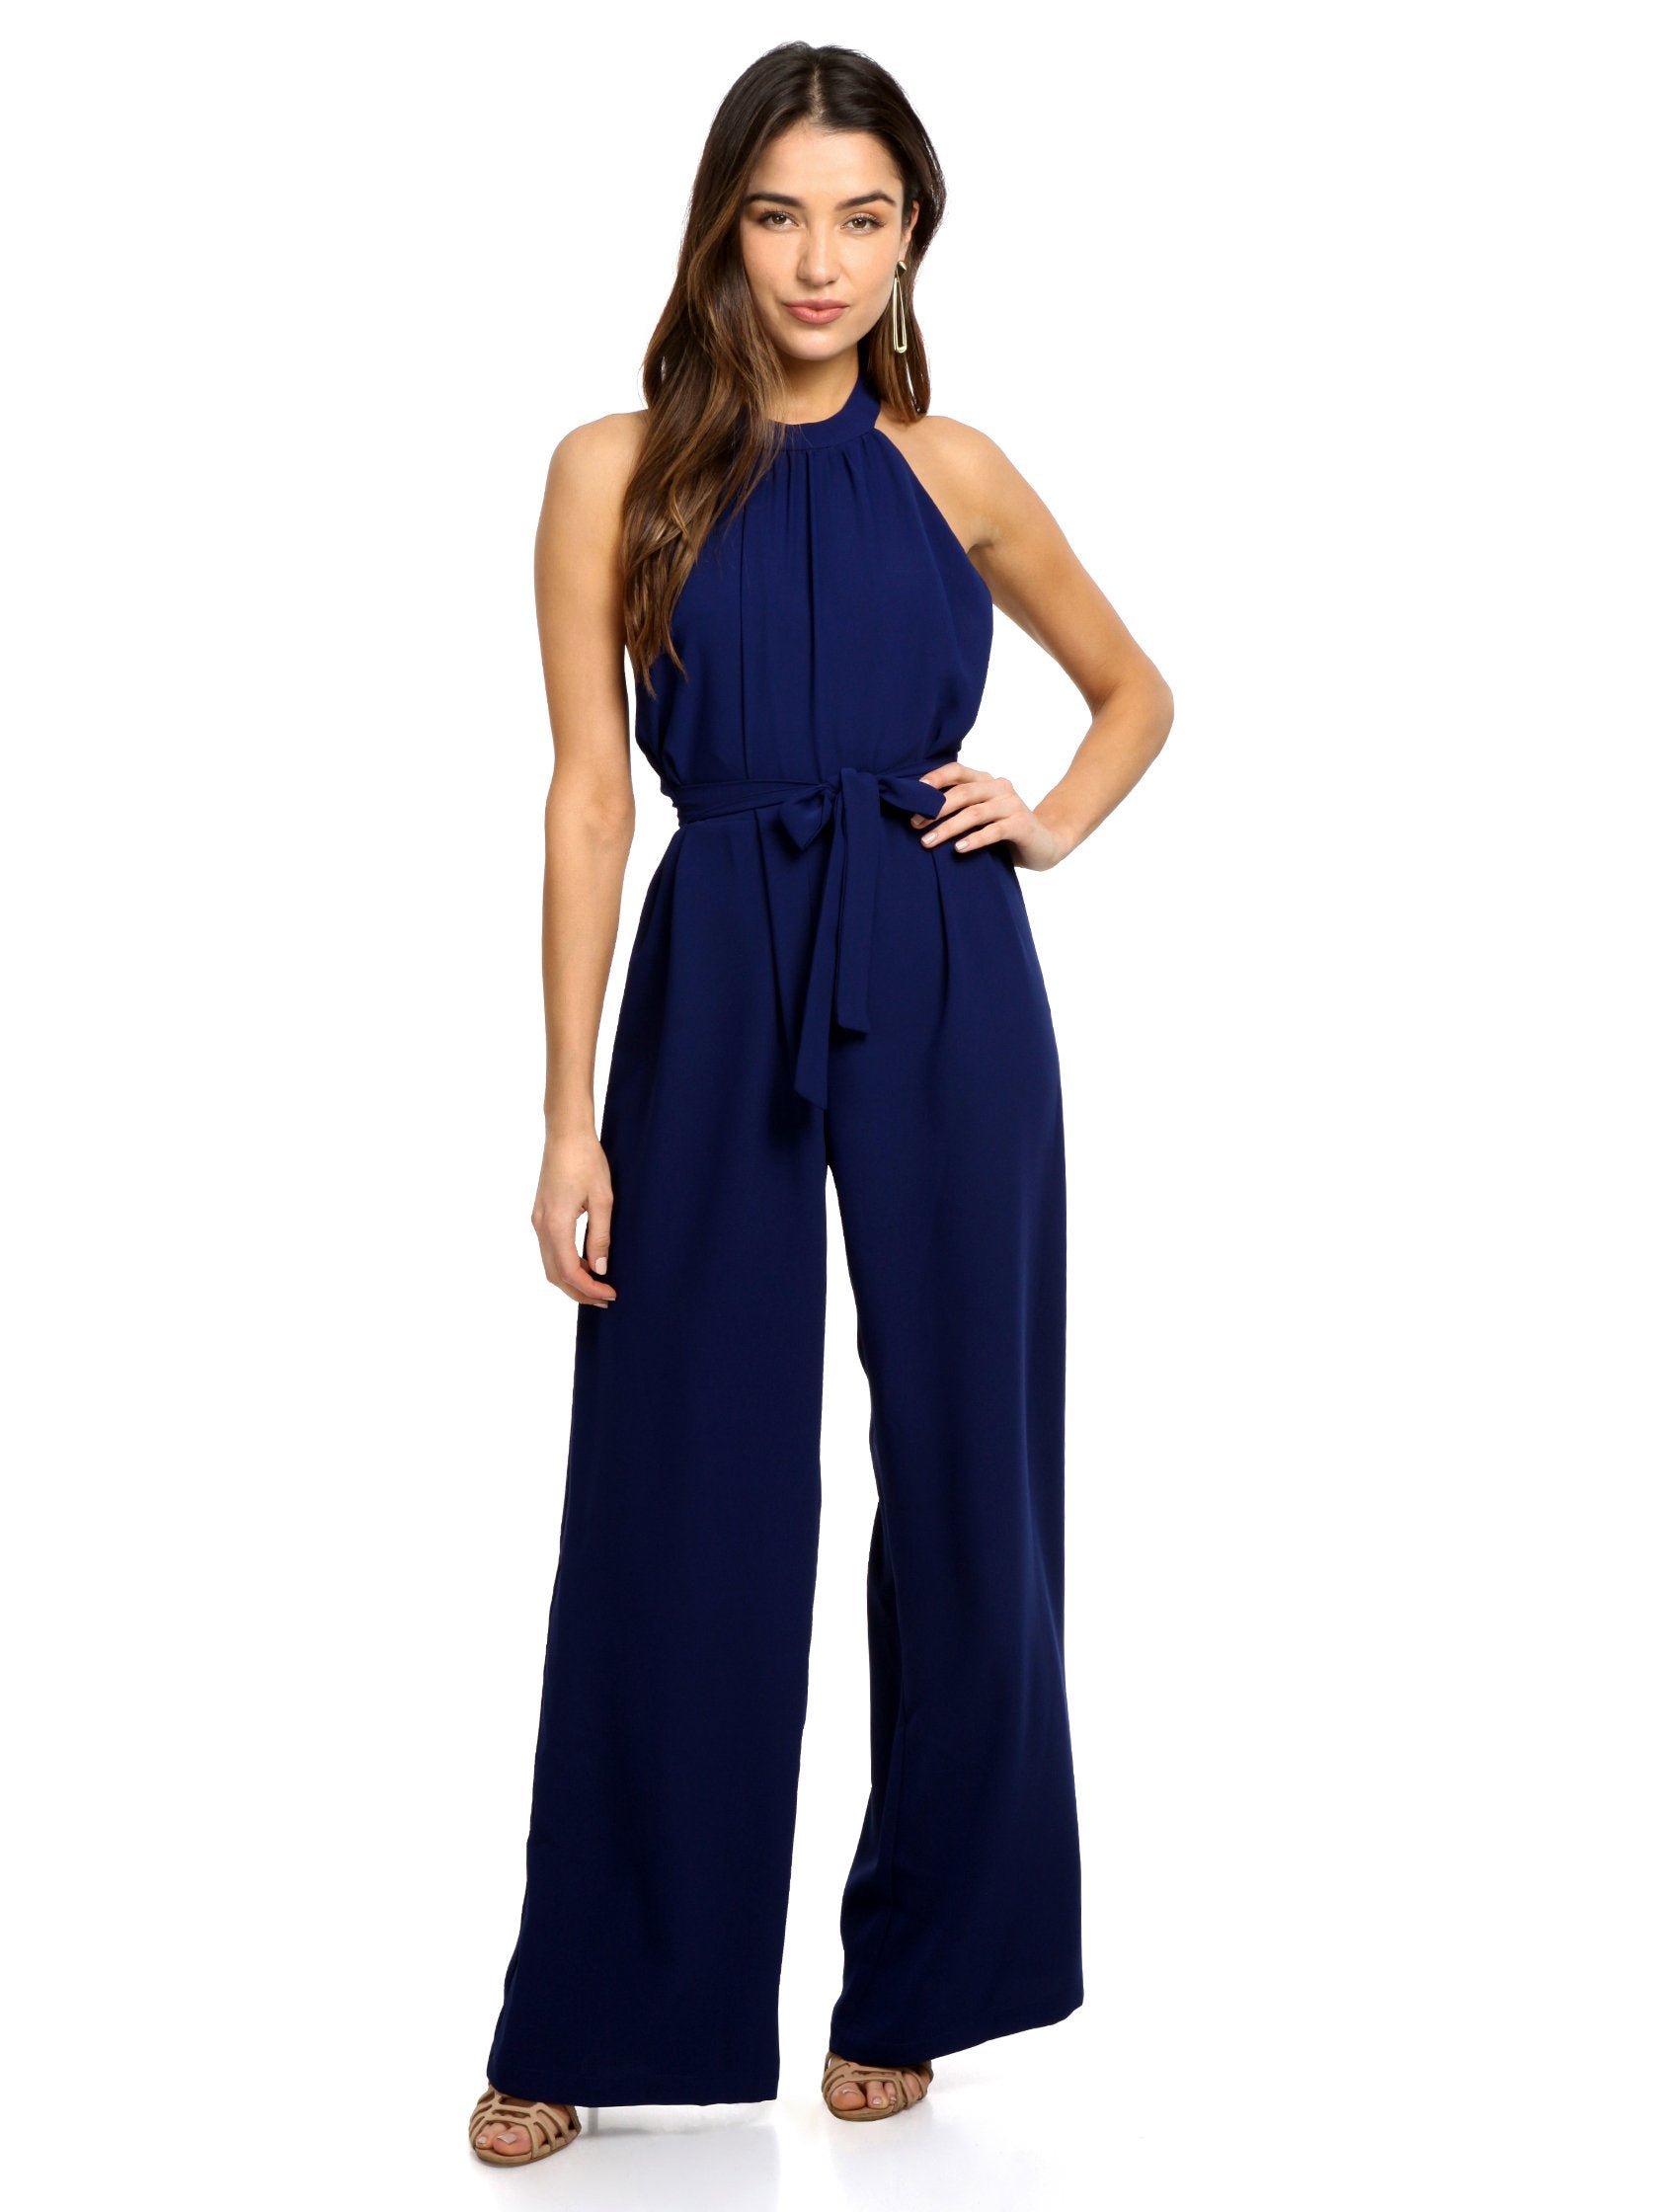 Girl outfit in a jumpsuit rental from Amanda Uprichard called Lawrence Jumpsuit